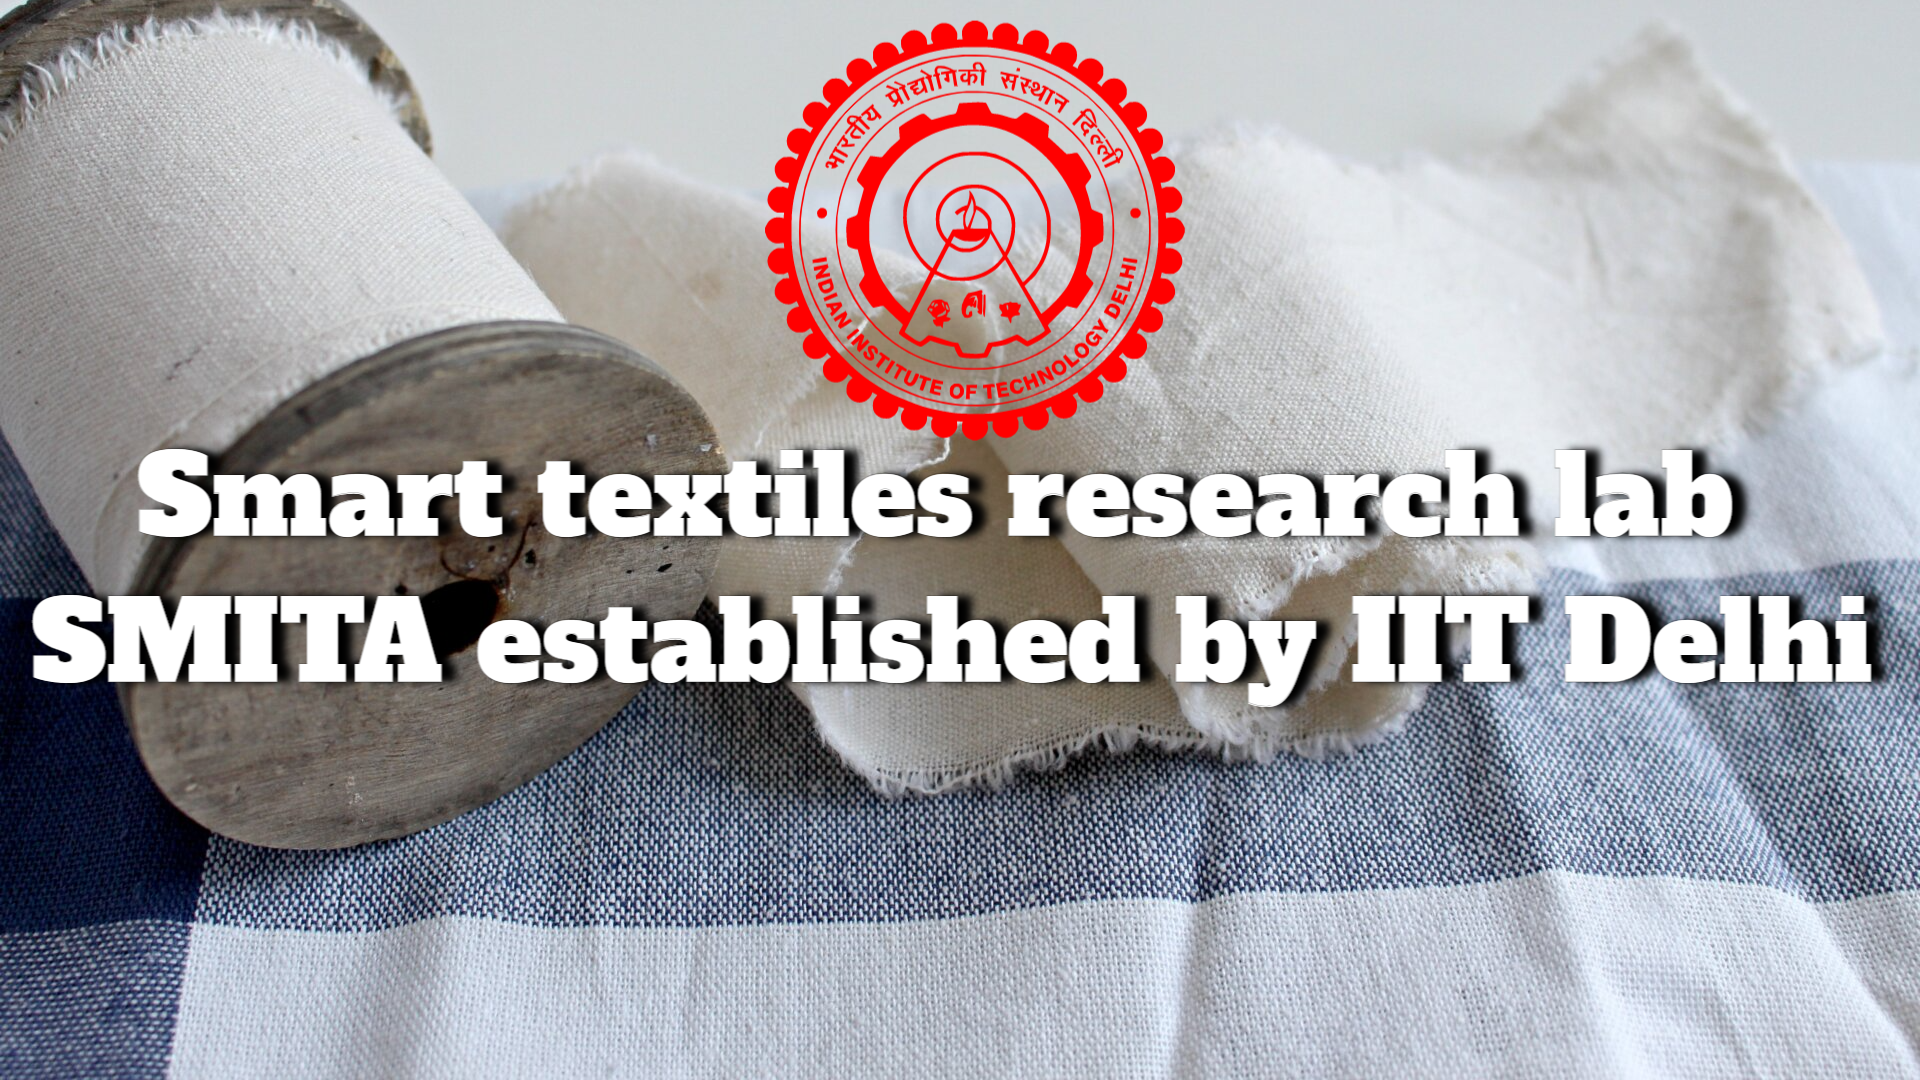 SMITA research lab established at IIT Delhi as a centre of excellence in smart textiles